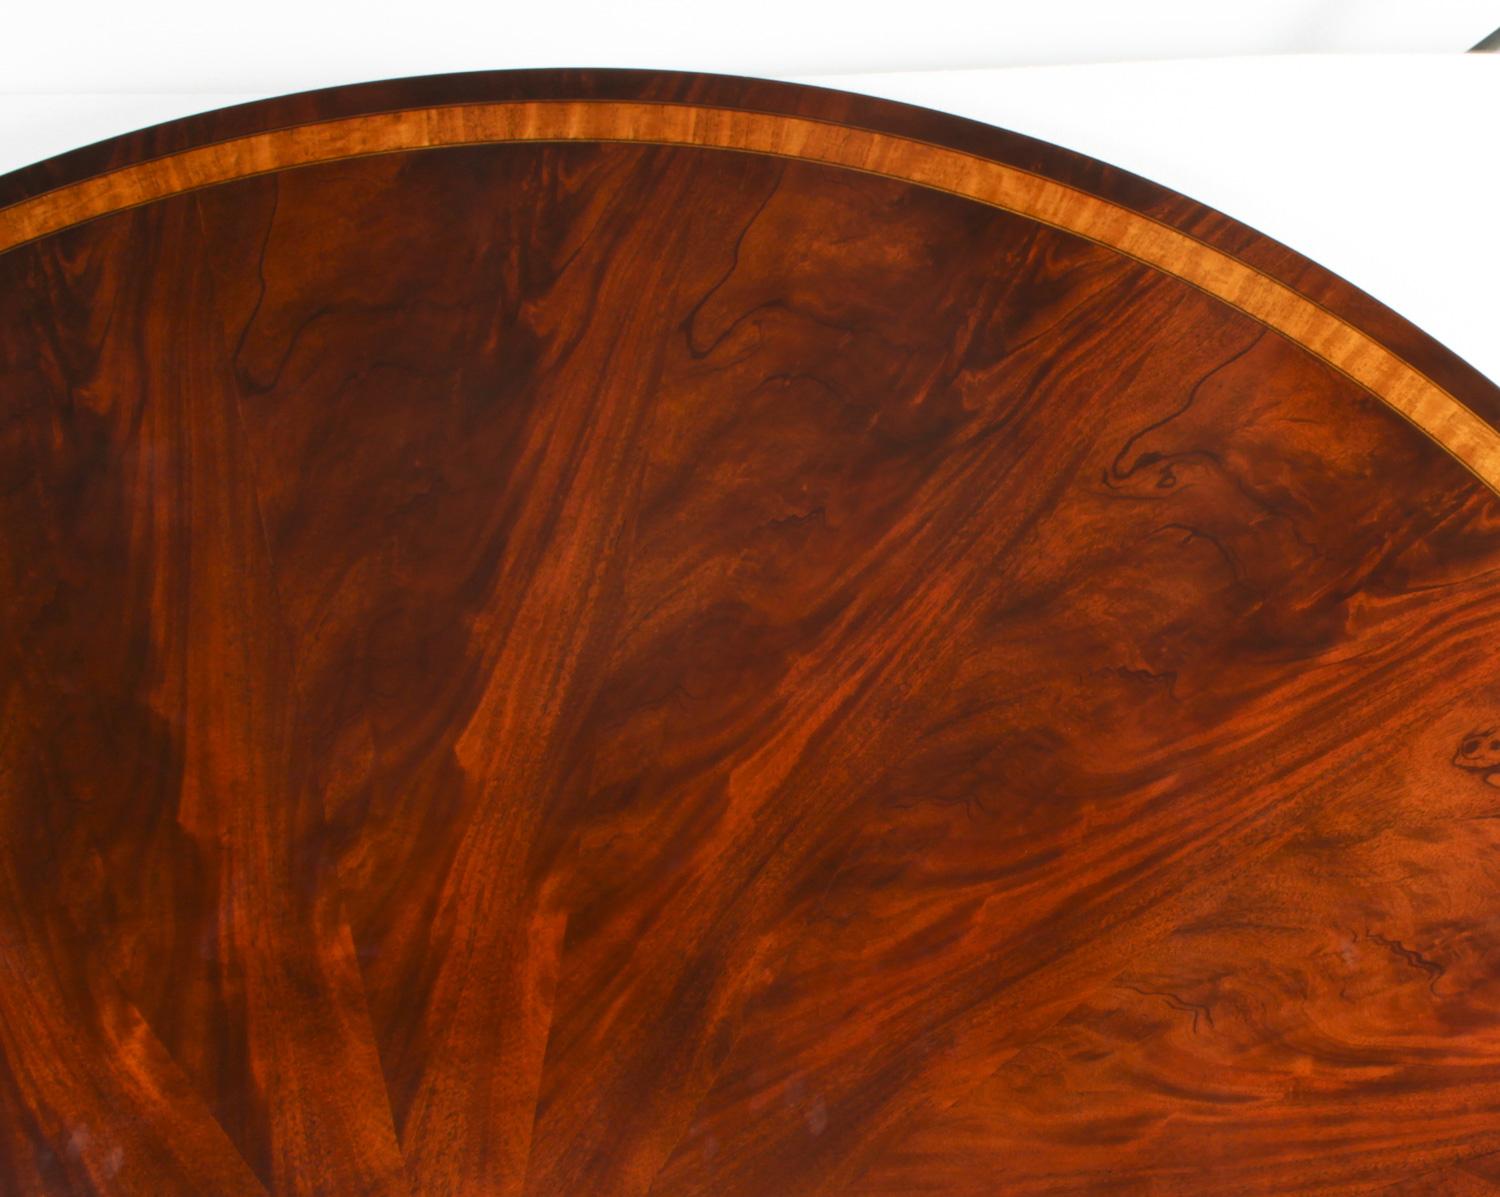 Vintage Flame Mahogany Regency Revival Dining Table, 20th C For Sale 5